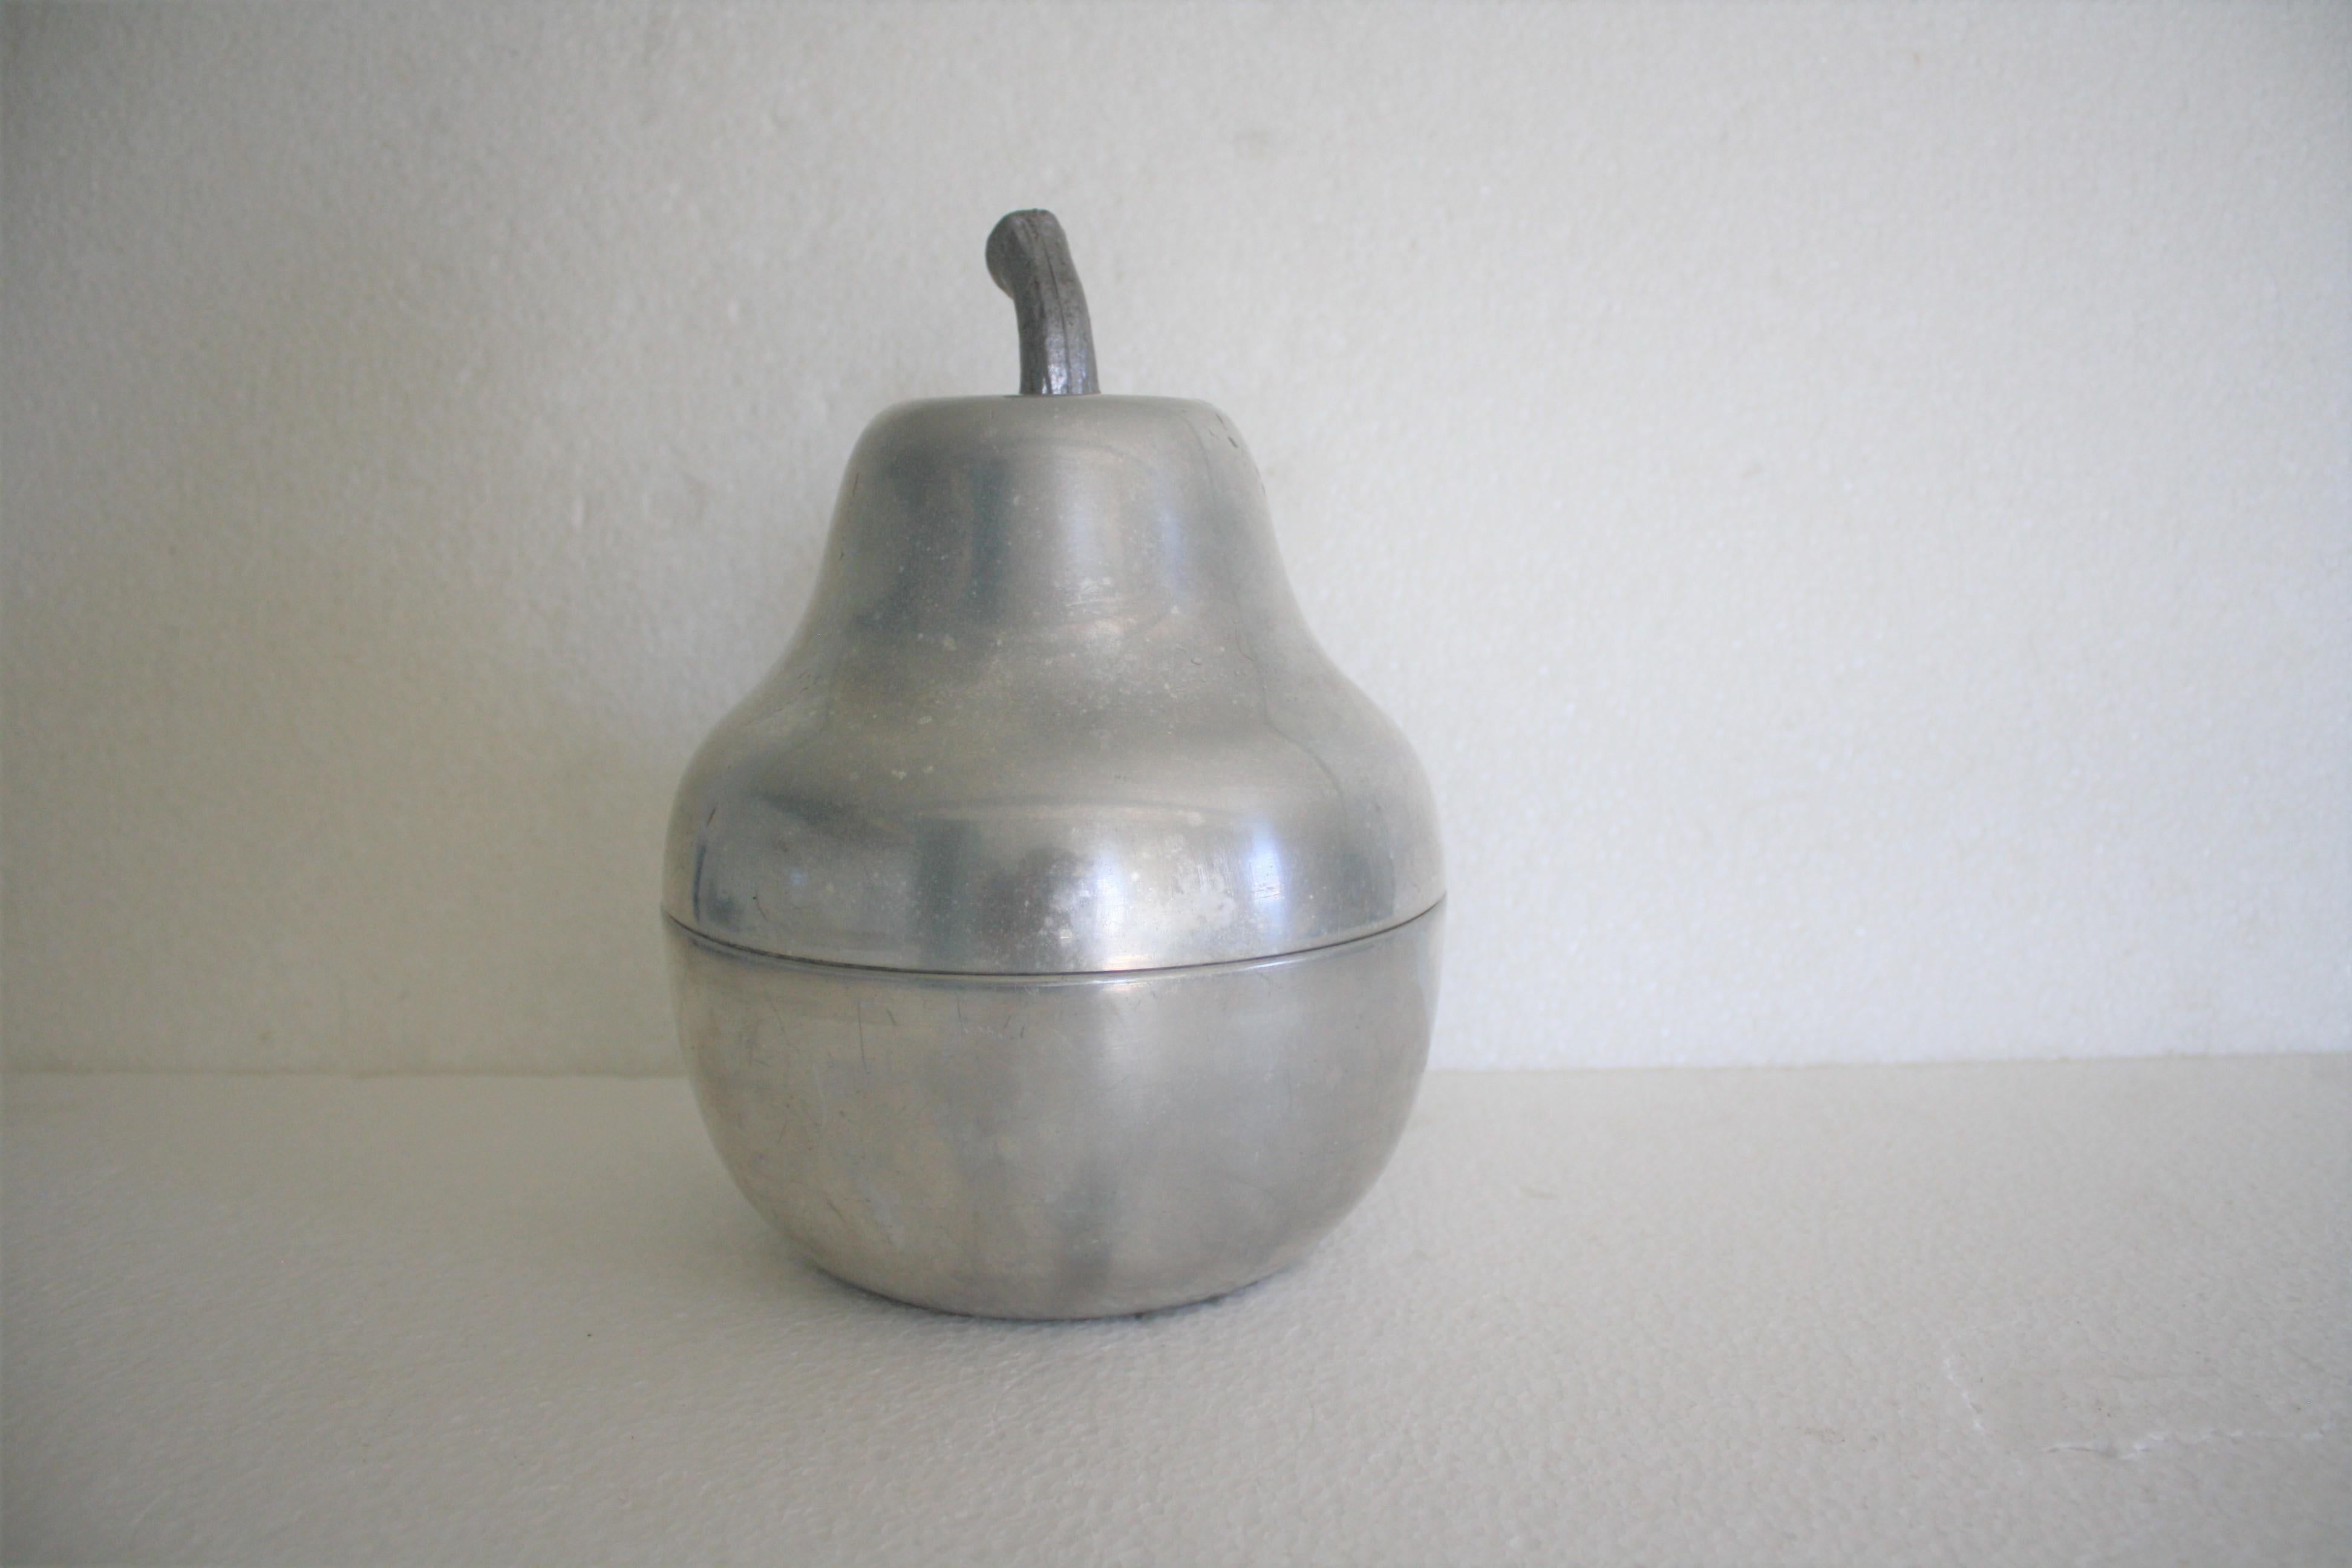 Vintage ice bucket in the shape of a pear.

Made from aluminum and plastic.

Good condition, no dents, only slight scratches.

1970s, Italy

Measure: Height 28 cm/11